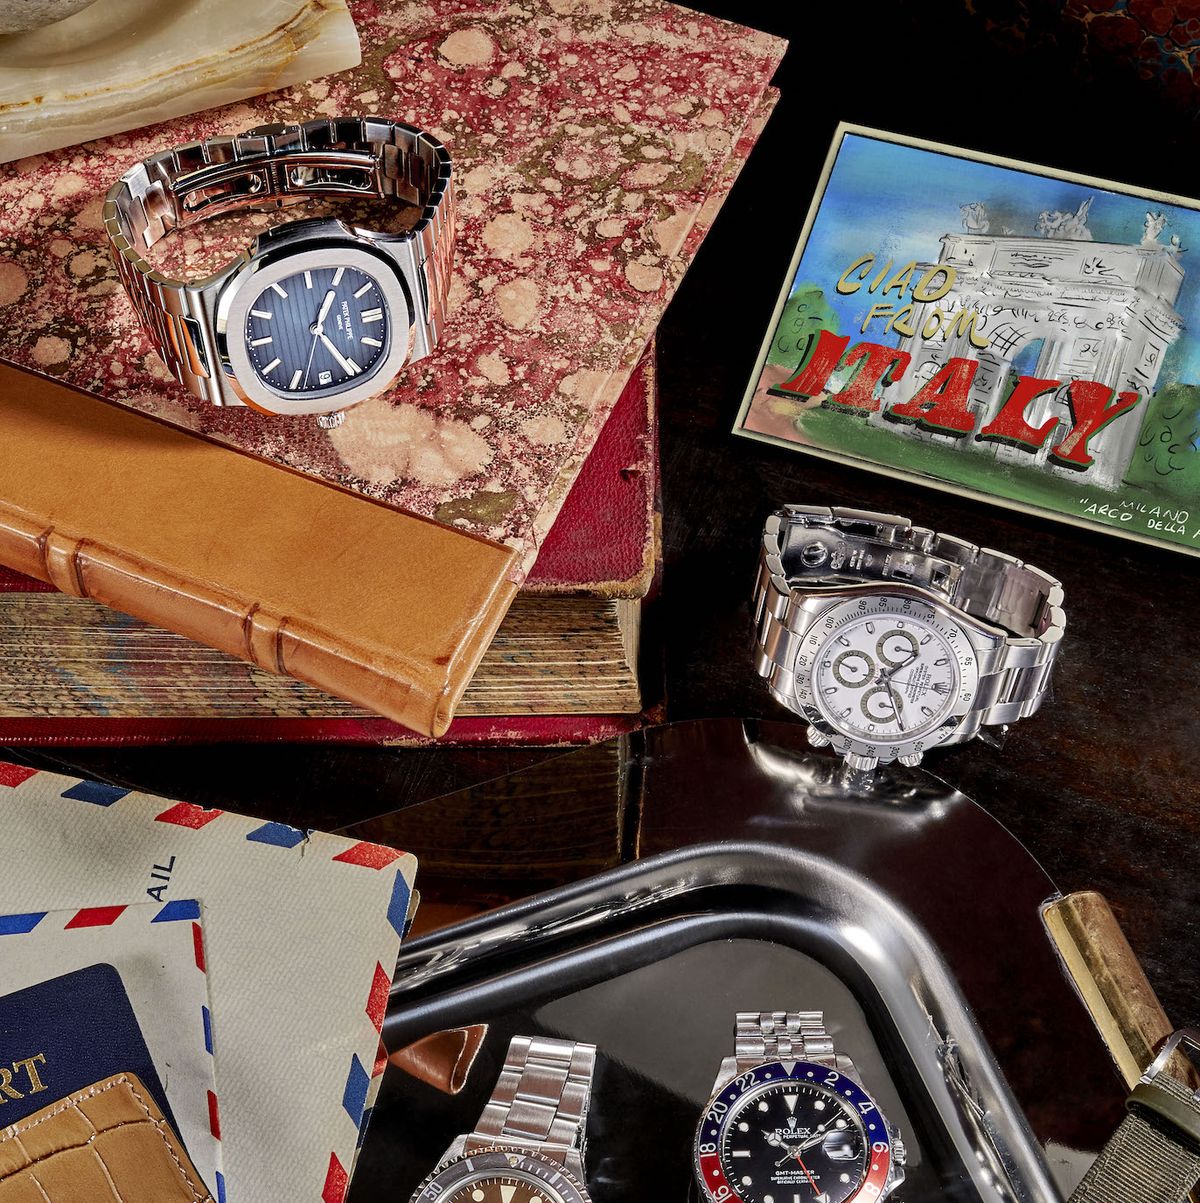 Rolex, Patek Philippe, IWC And Other Top Timepieces From Watches